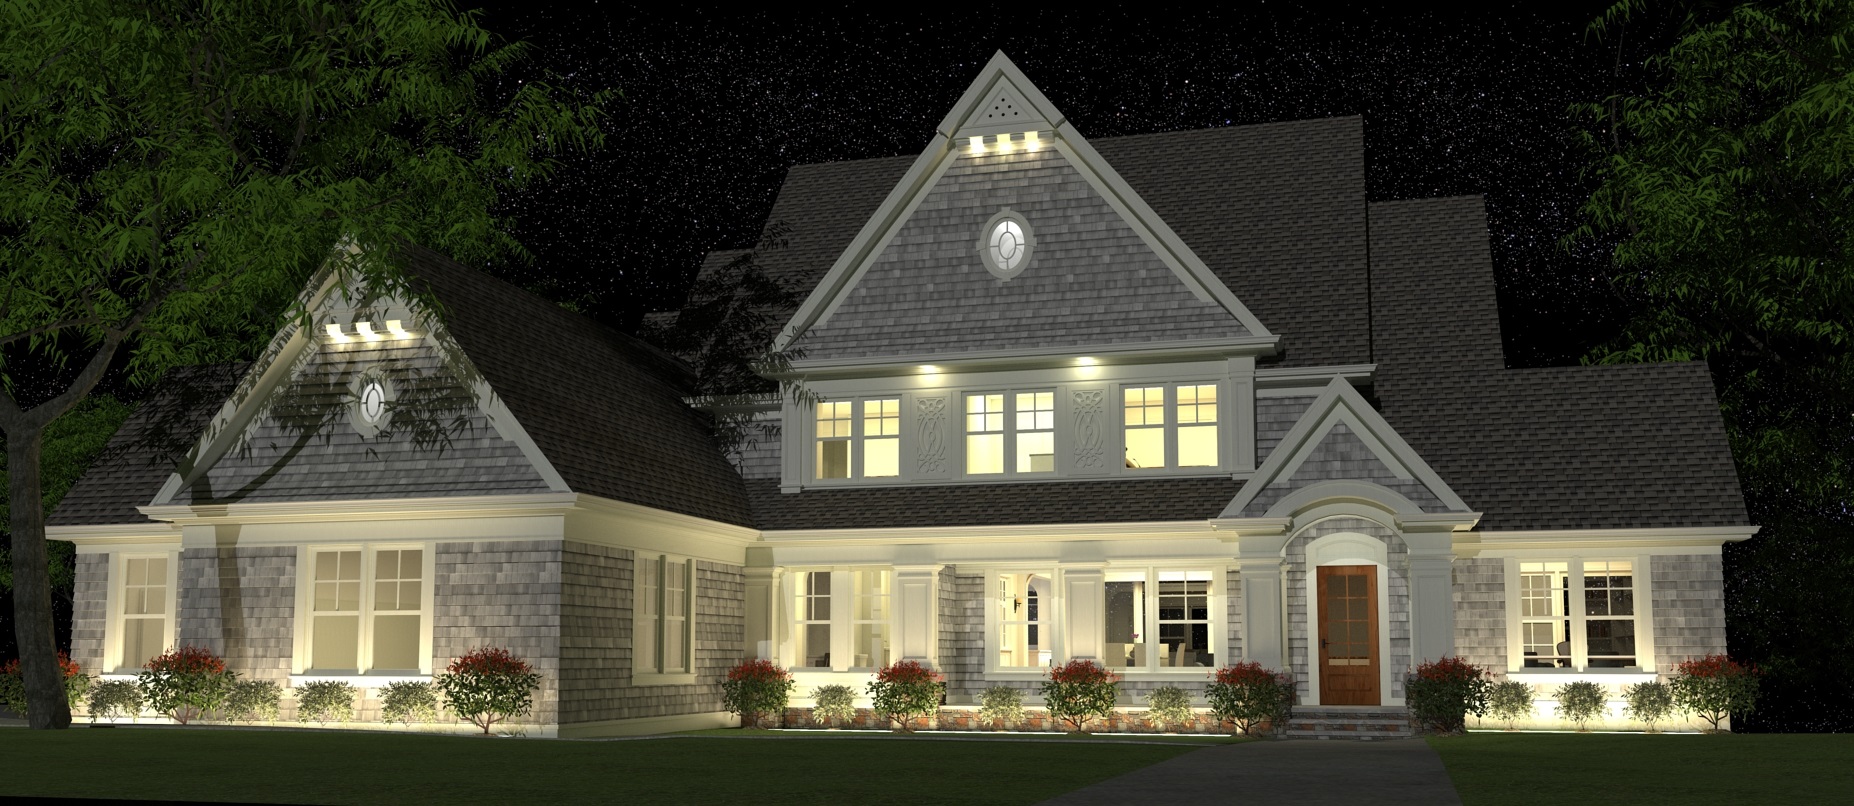 Image for BATC Foundation Features Three Dream Homes in the  2013 Fall Parade of Homes(sm)